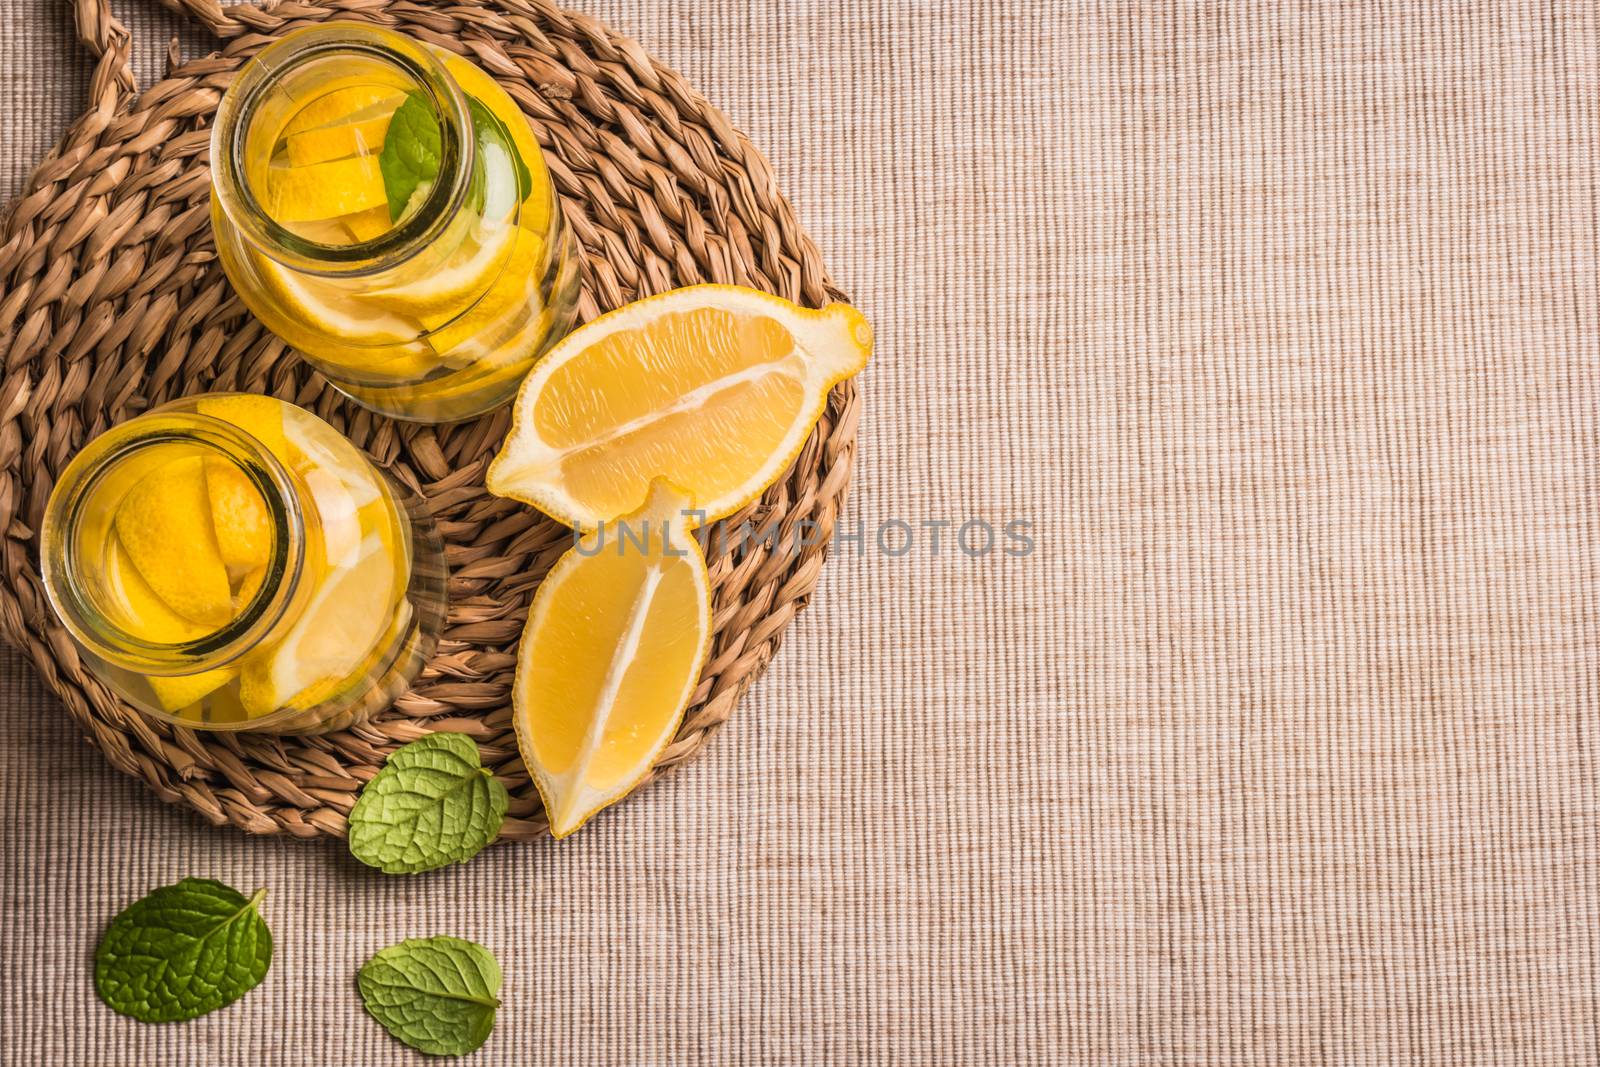 Slices and half fresh juicy lemon with mint leaves by AnaMarques